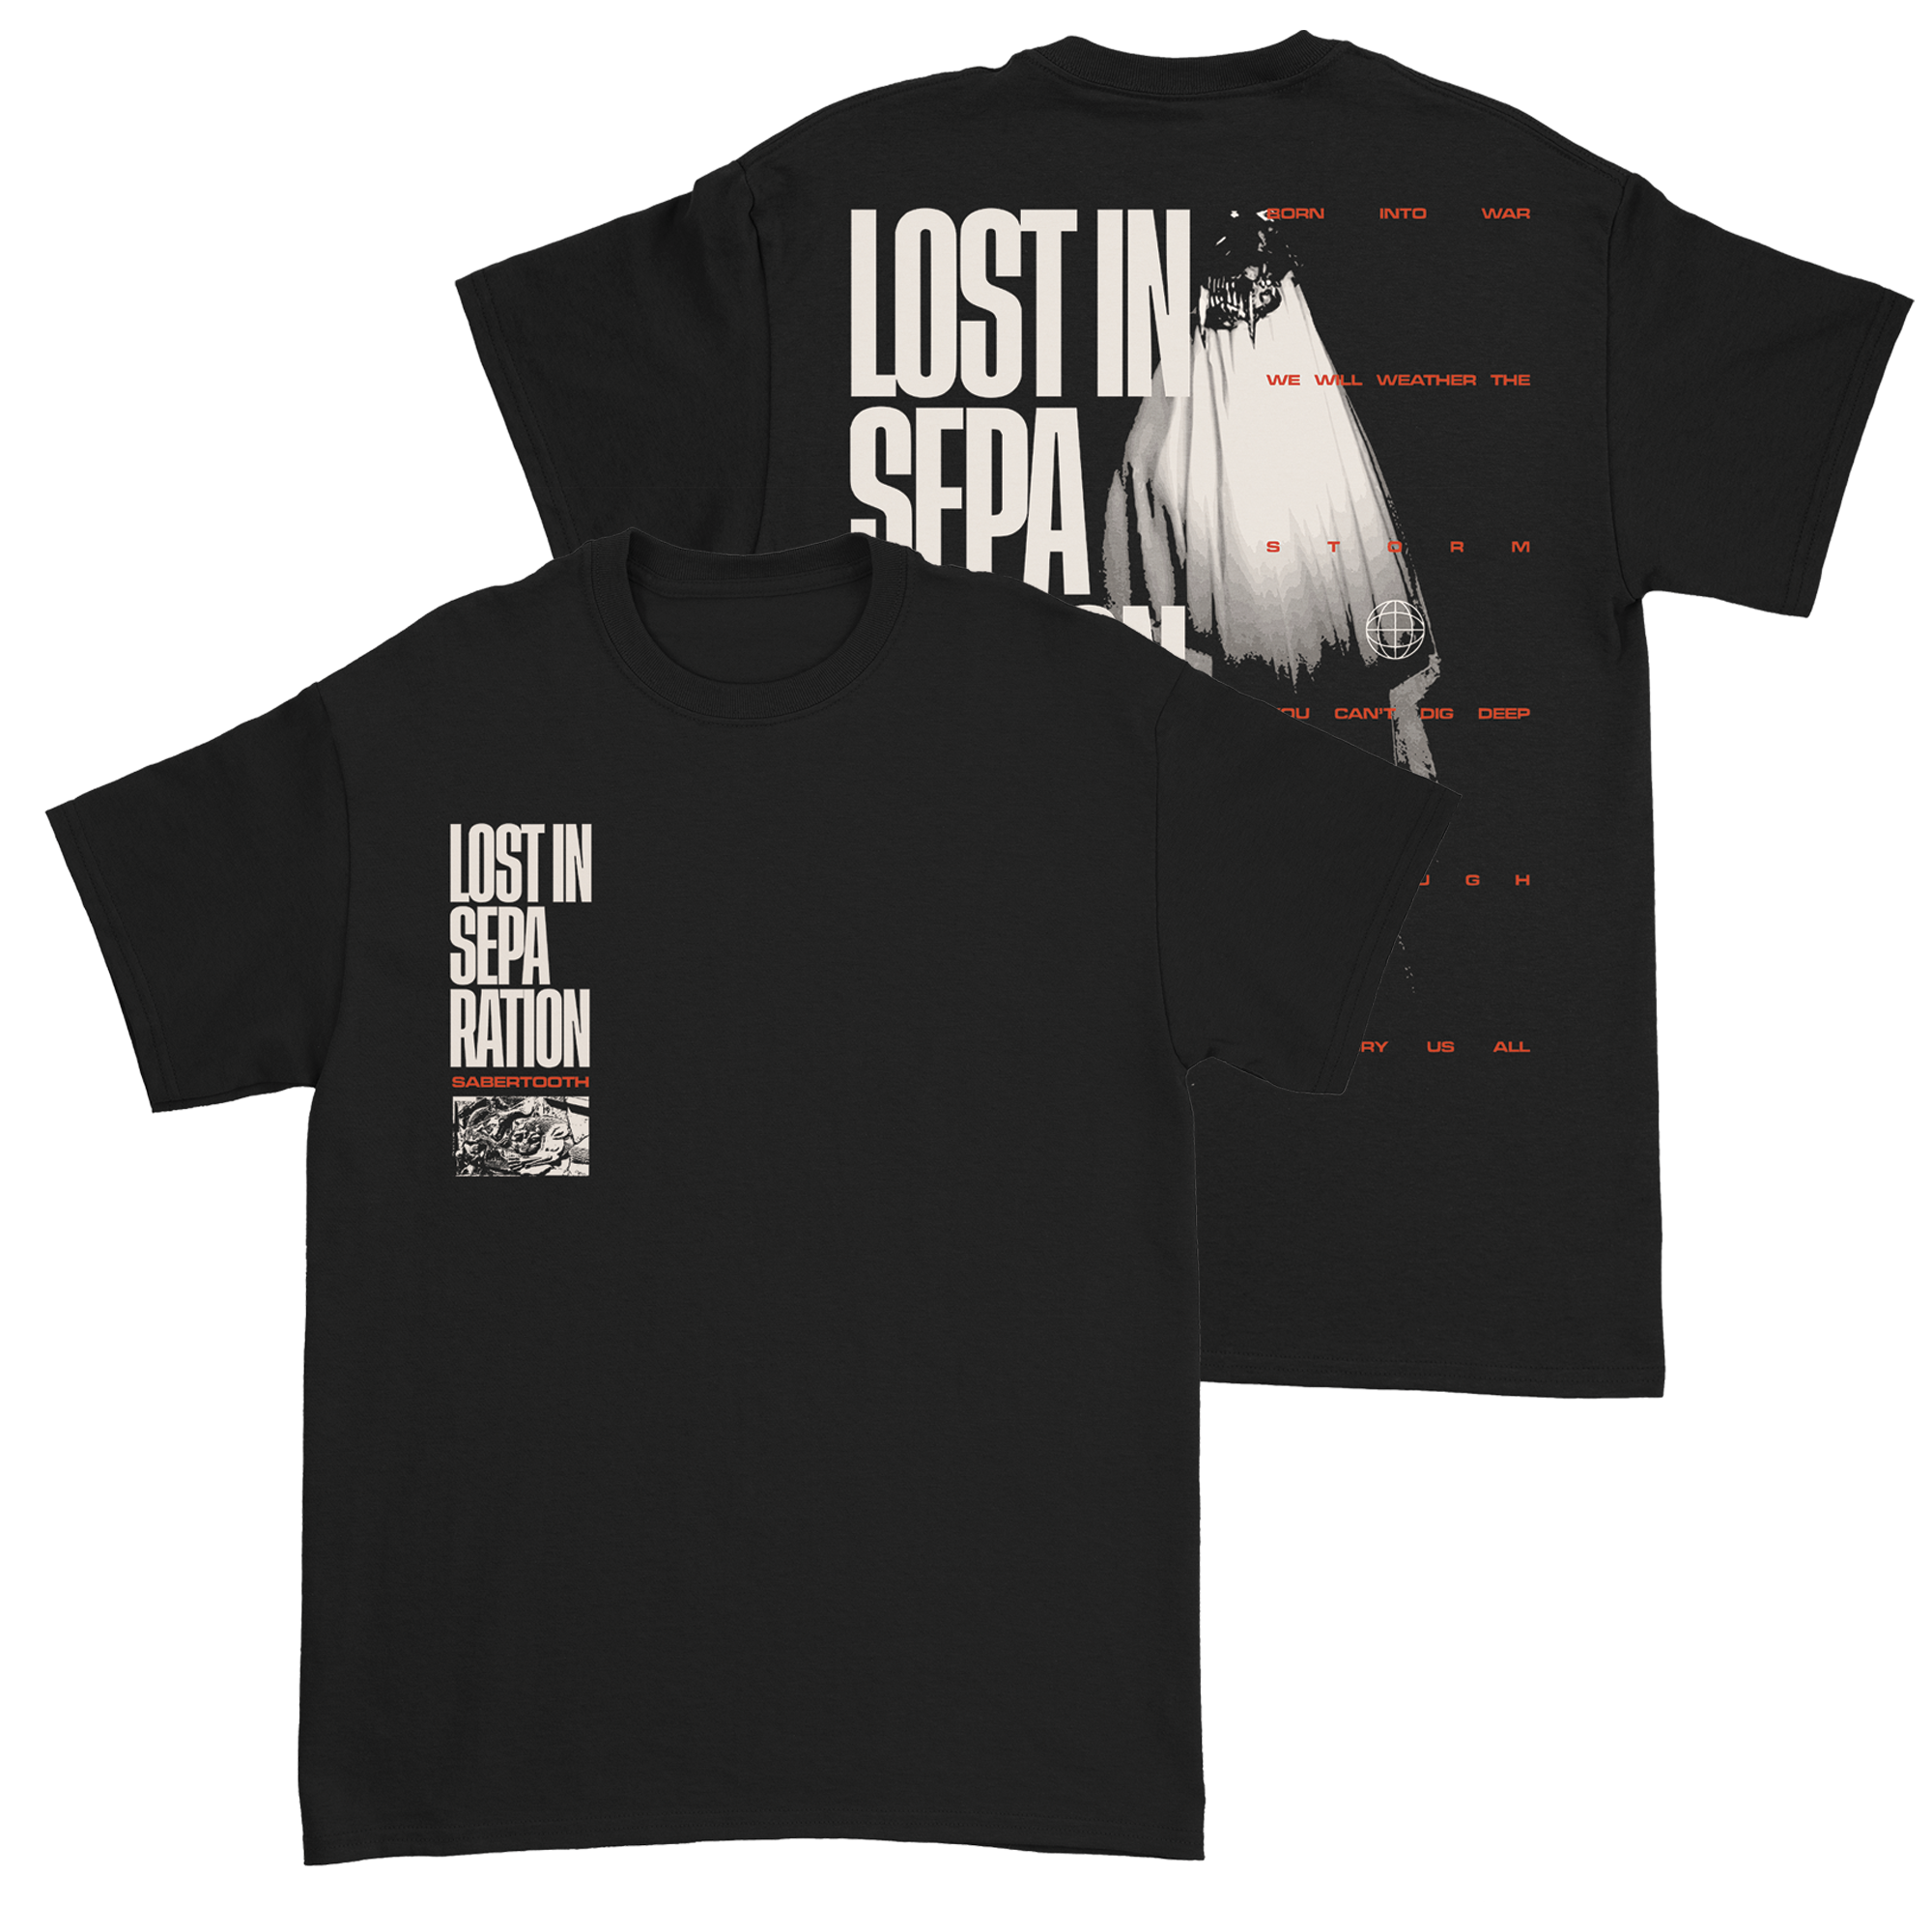 Lost In Separation - Sabertooth T-Shirt (Pre-Order)